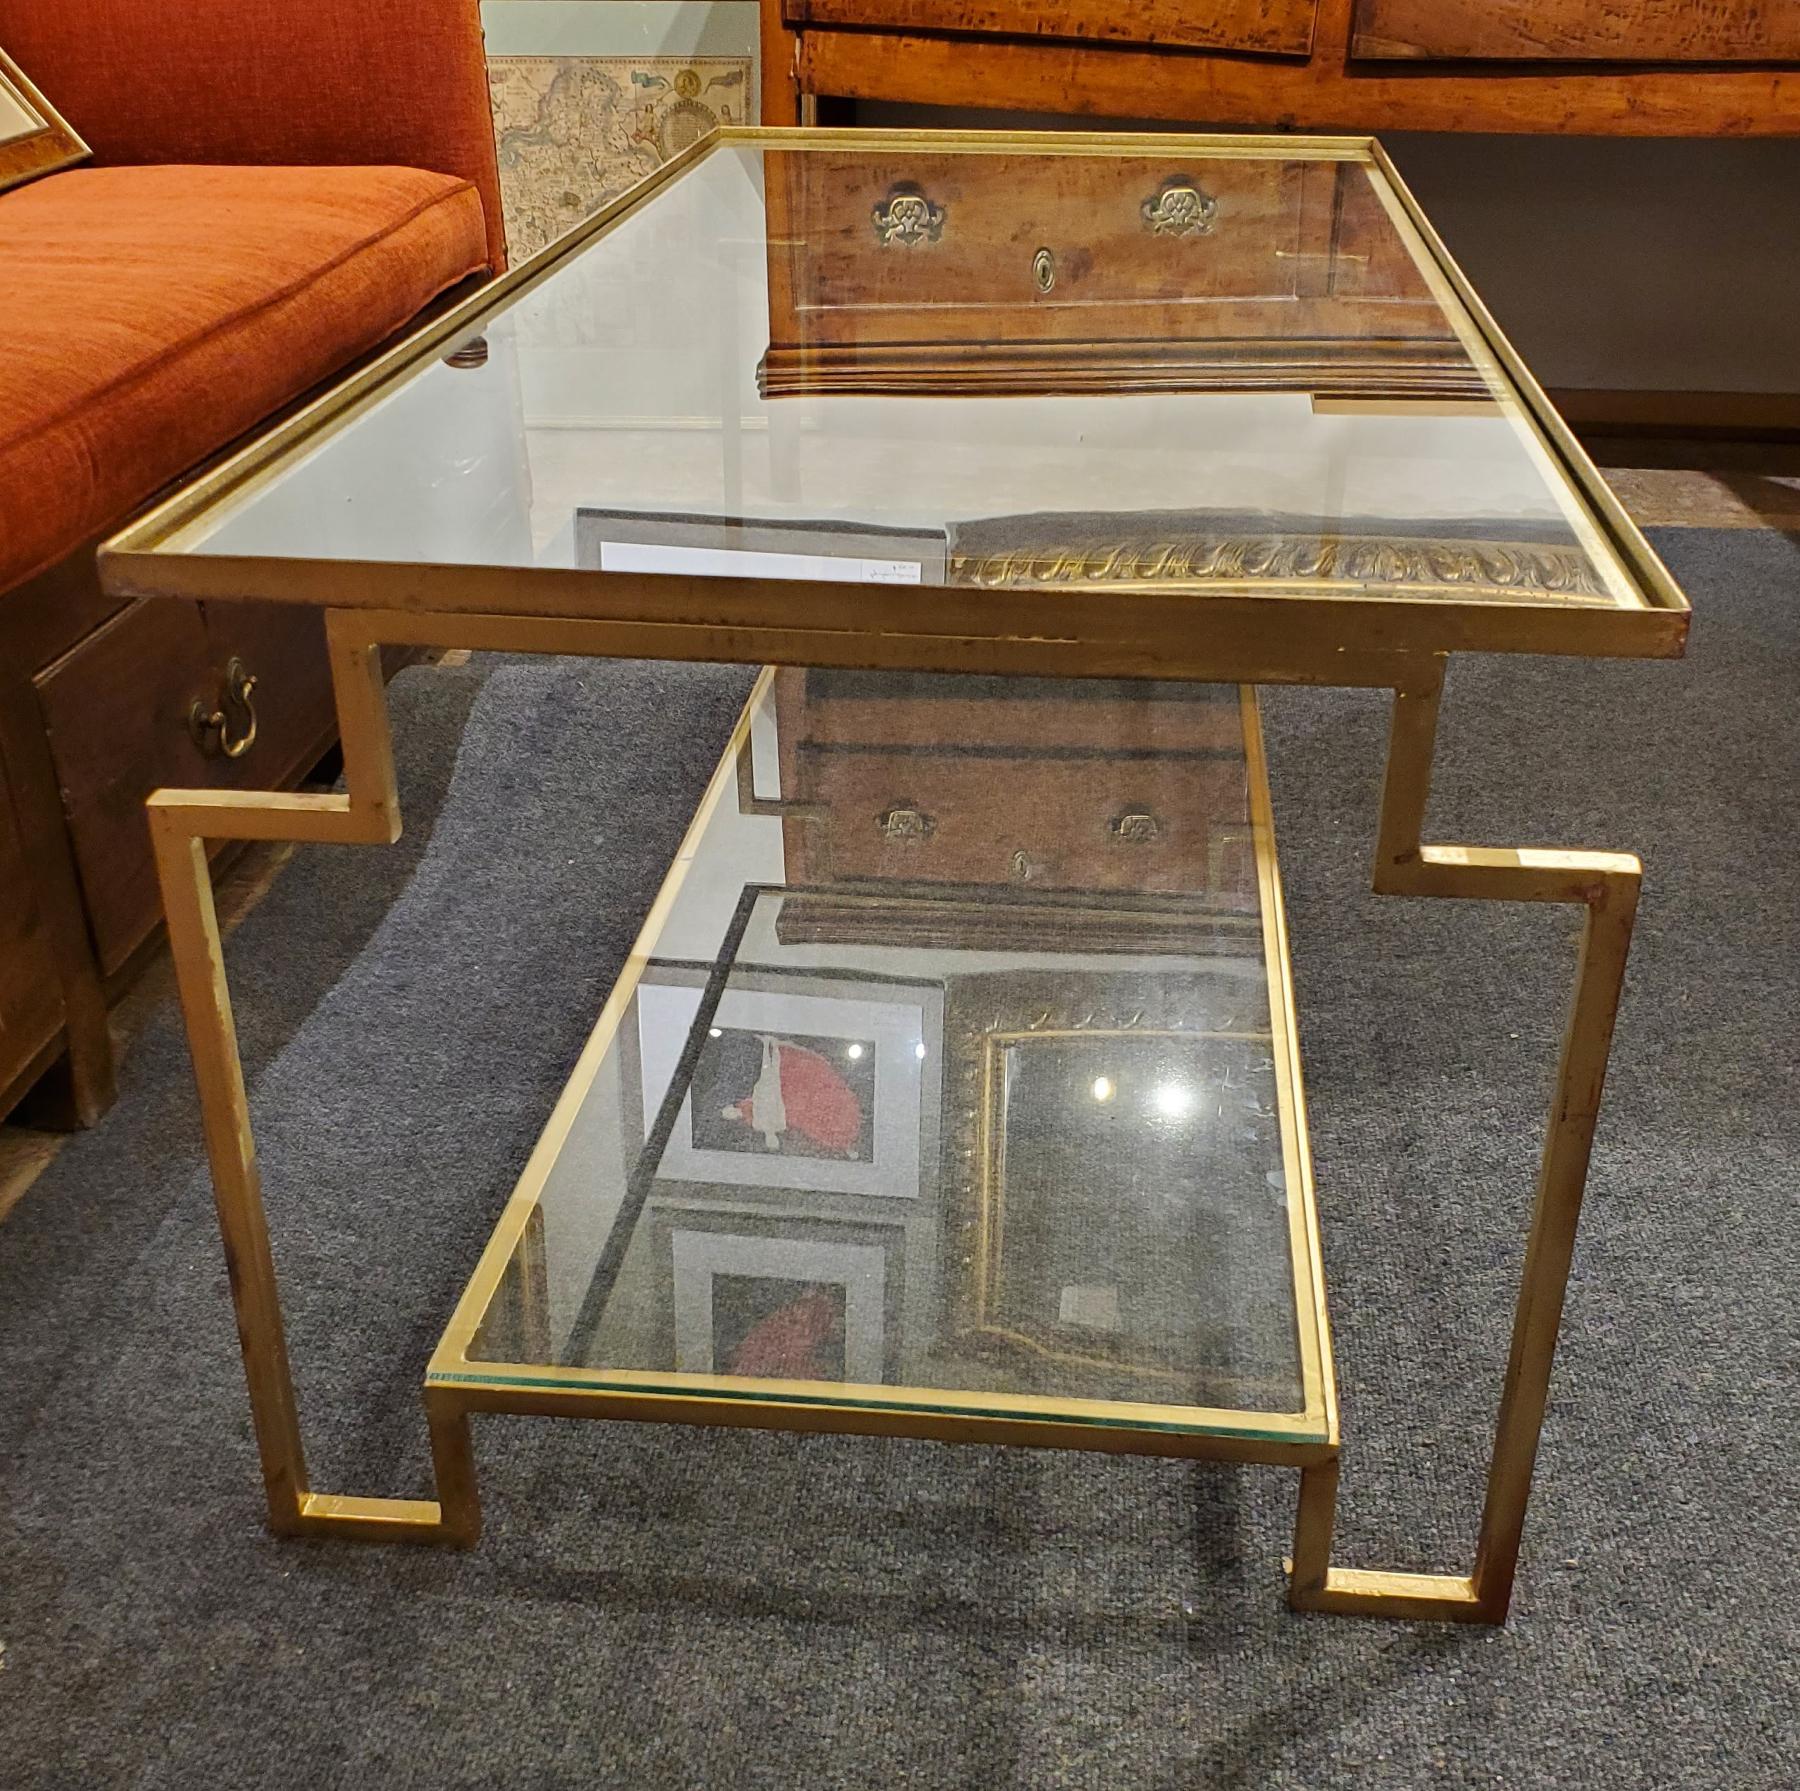 Post Modern Style “Apollo” gilt metal coffee table. Excellent proportions, very architectural with a “distressed” gilt finish to the metal and a glass top above a glass shelf. Designed by Hastening Designs - made in Virginia and the size can be